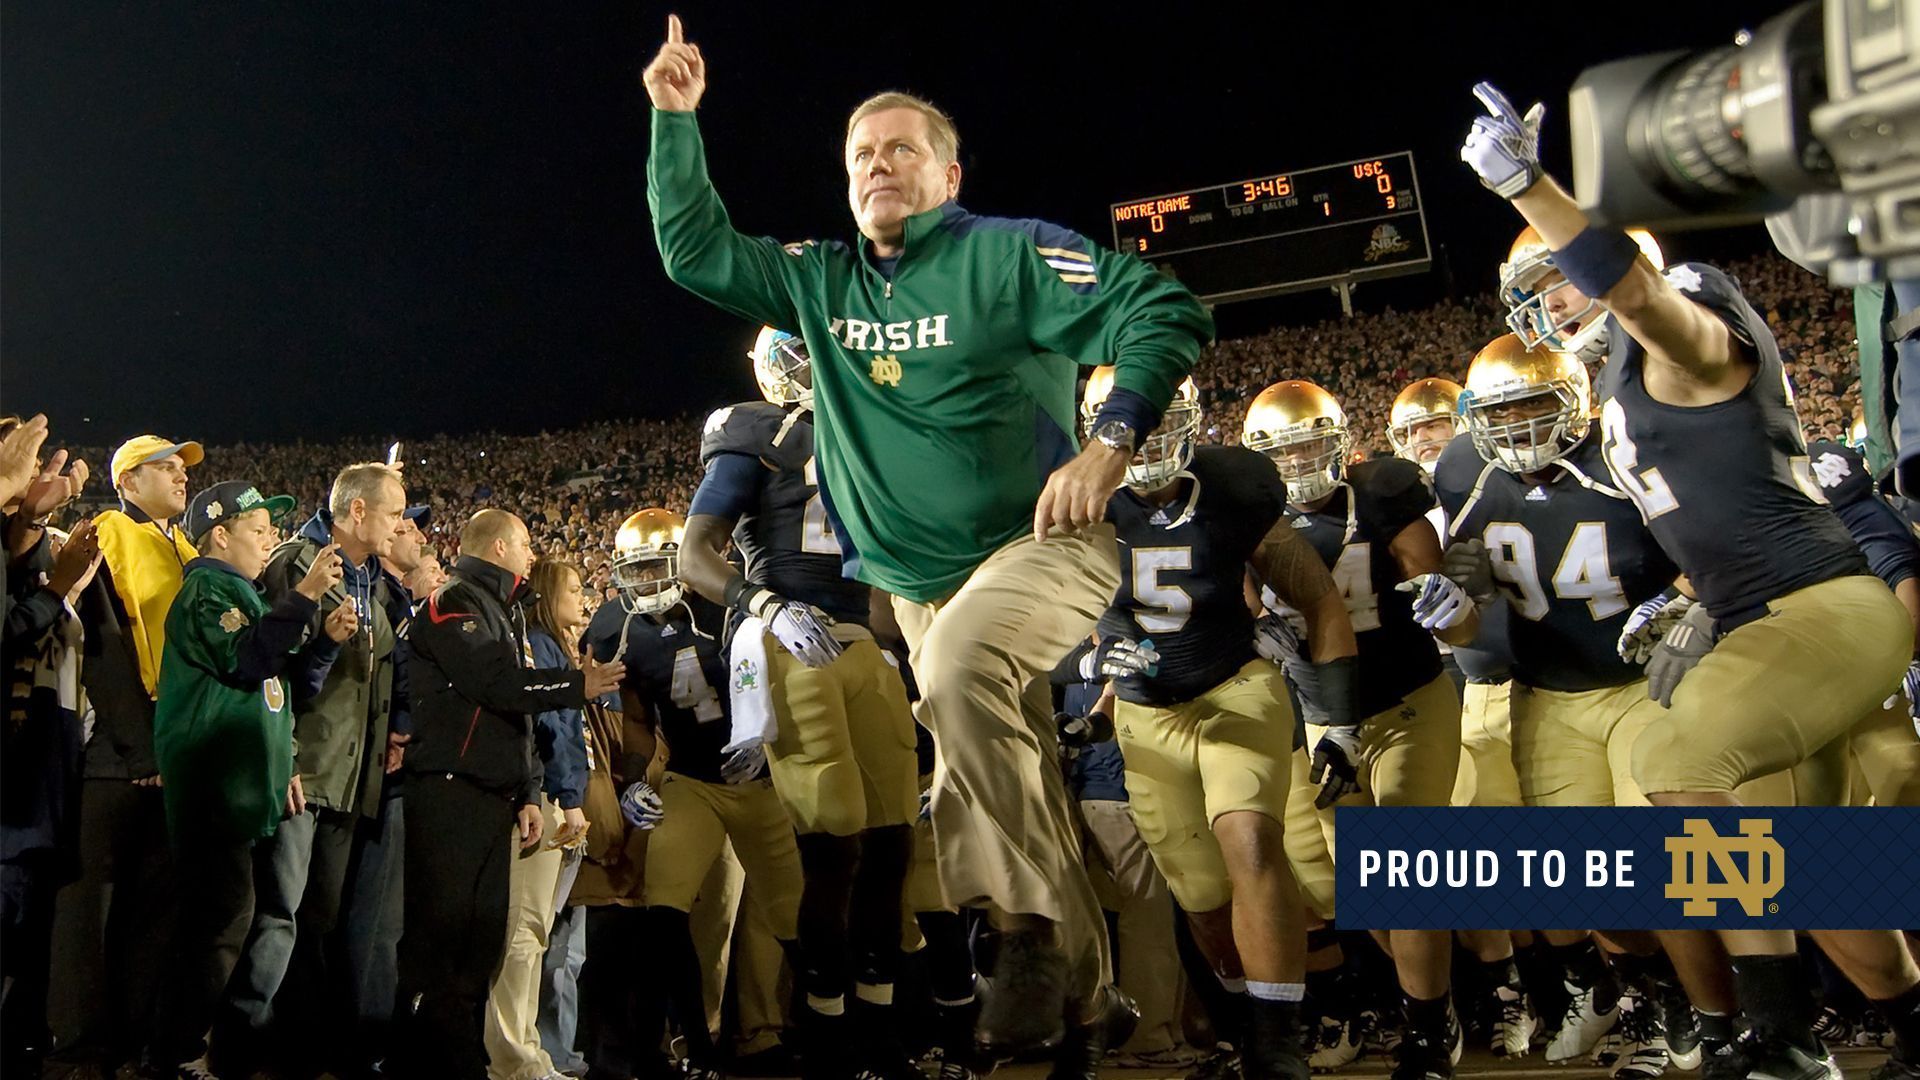 Backgrounds // Proud to Be ND // University of Notre Dame